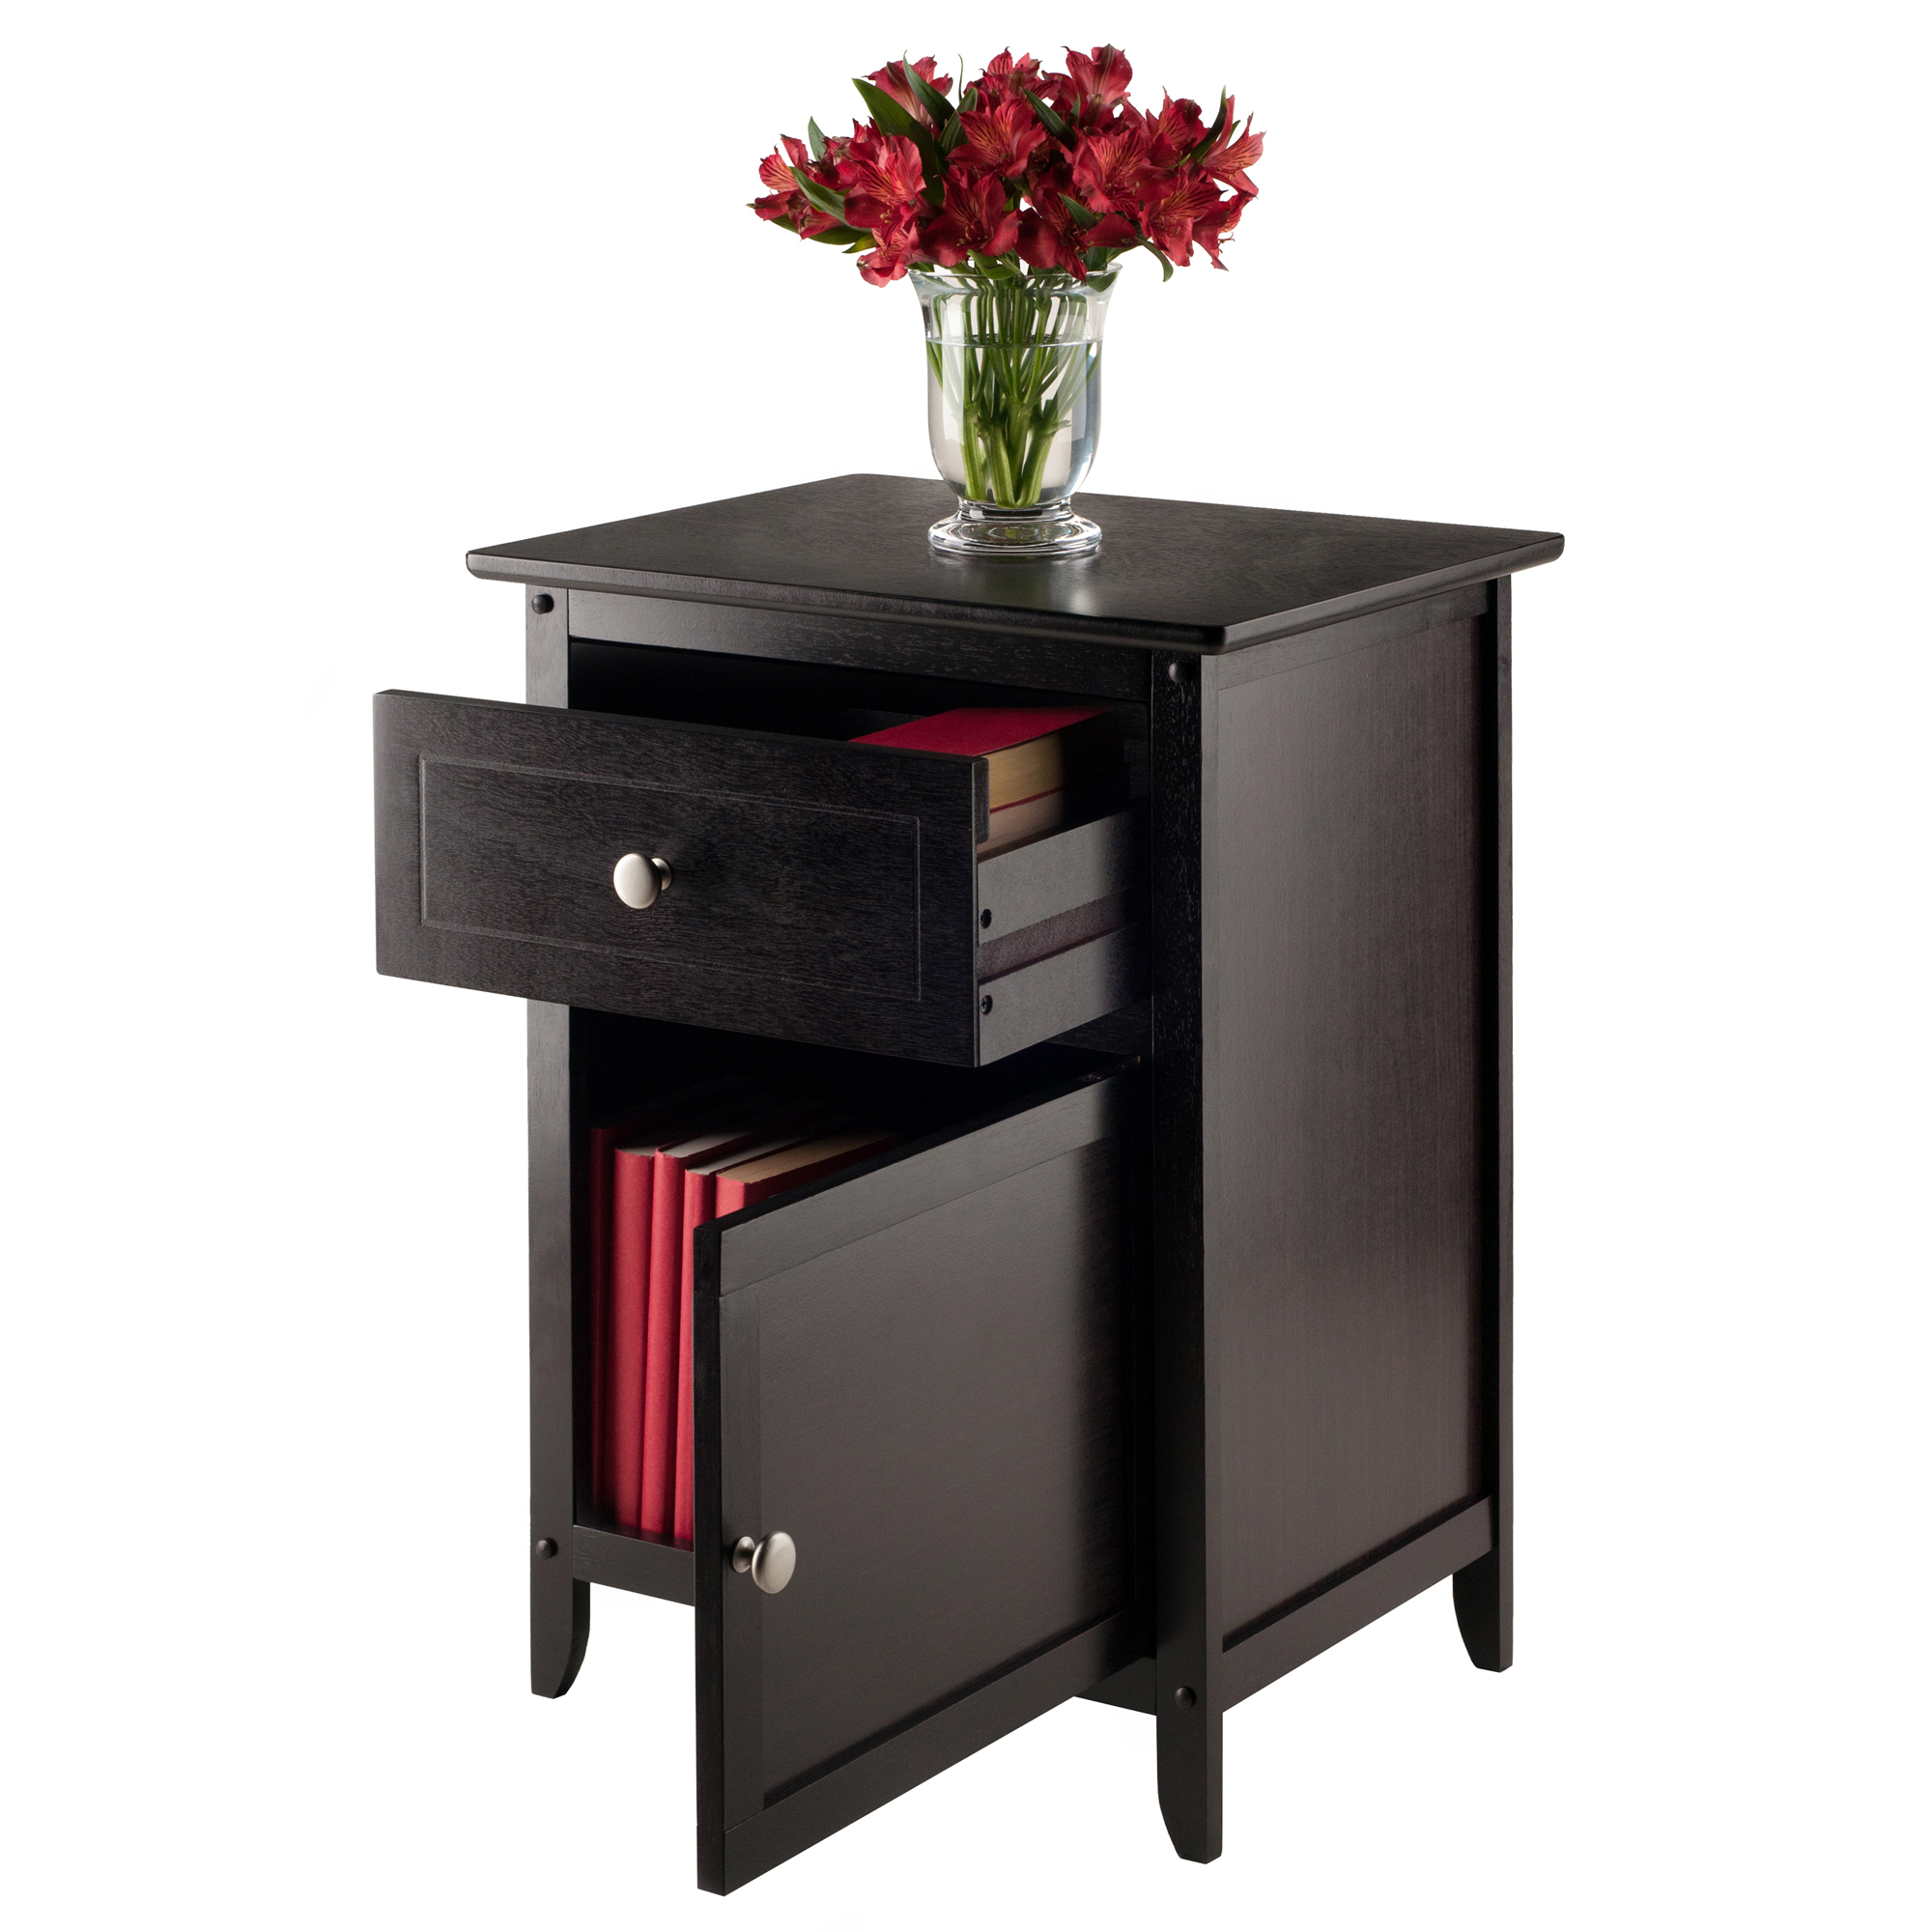 Winsome Wood Eugene Accent Table, Nightstand, Espresso Finish - image 2 of 9